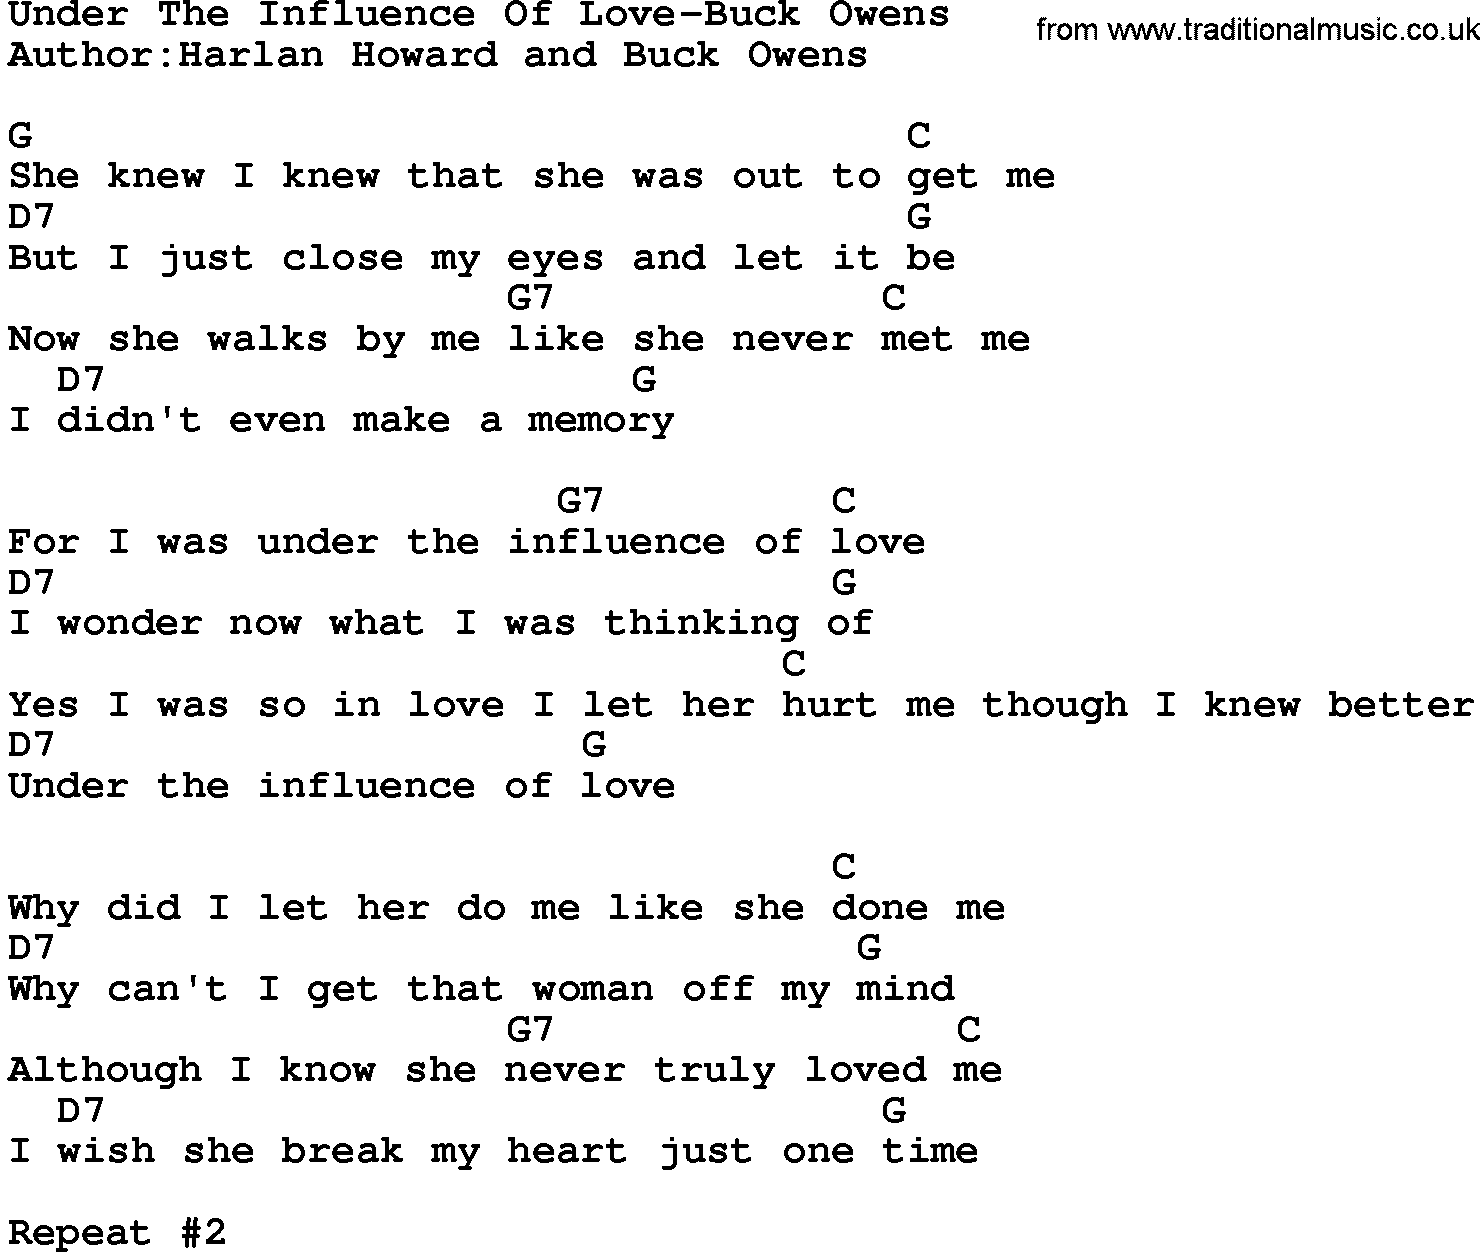 Country music song: Under The Influence Of Love-Buck Owens lyrics and chords